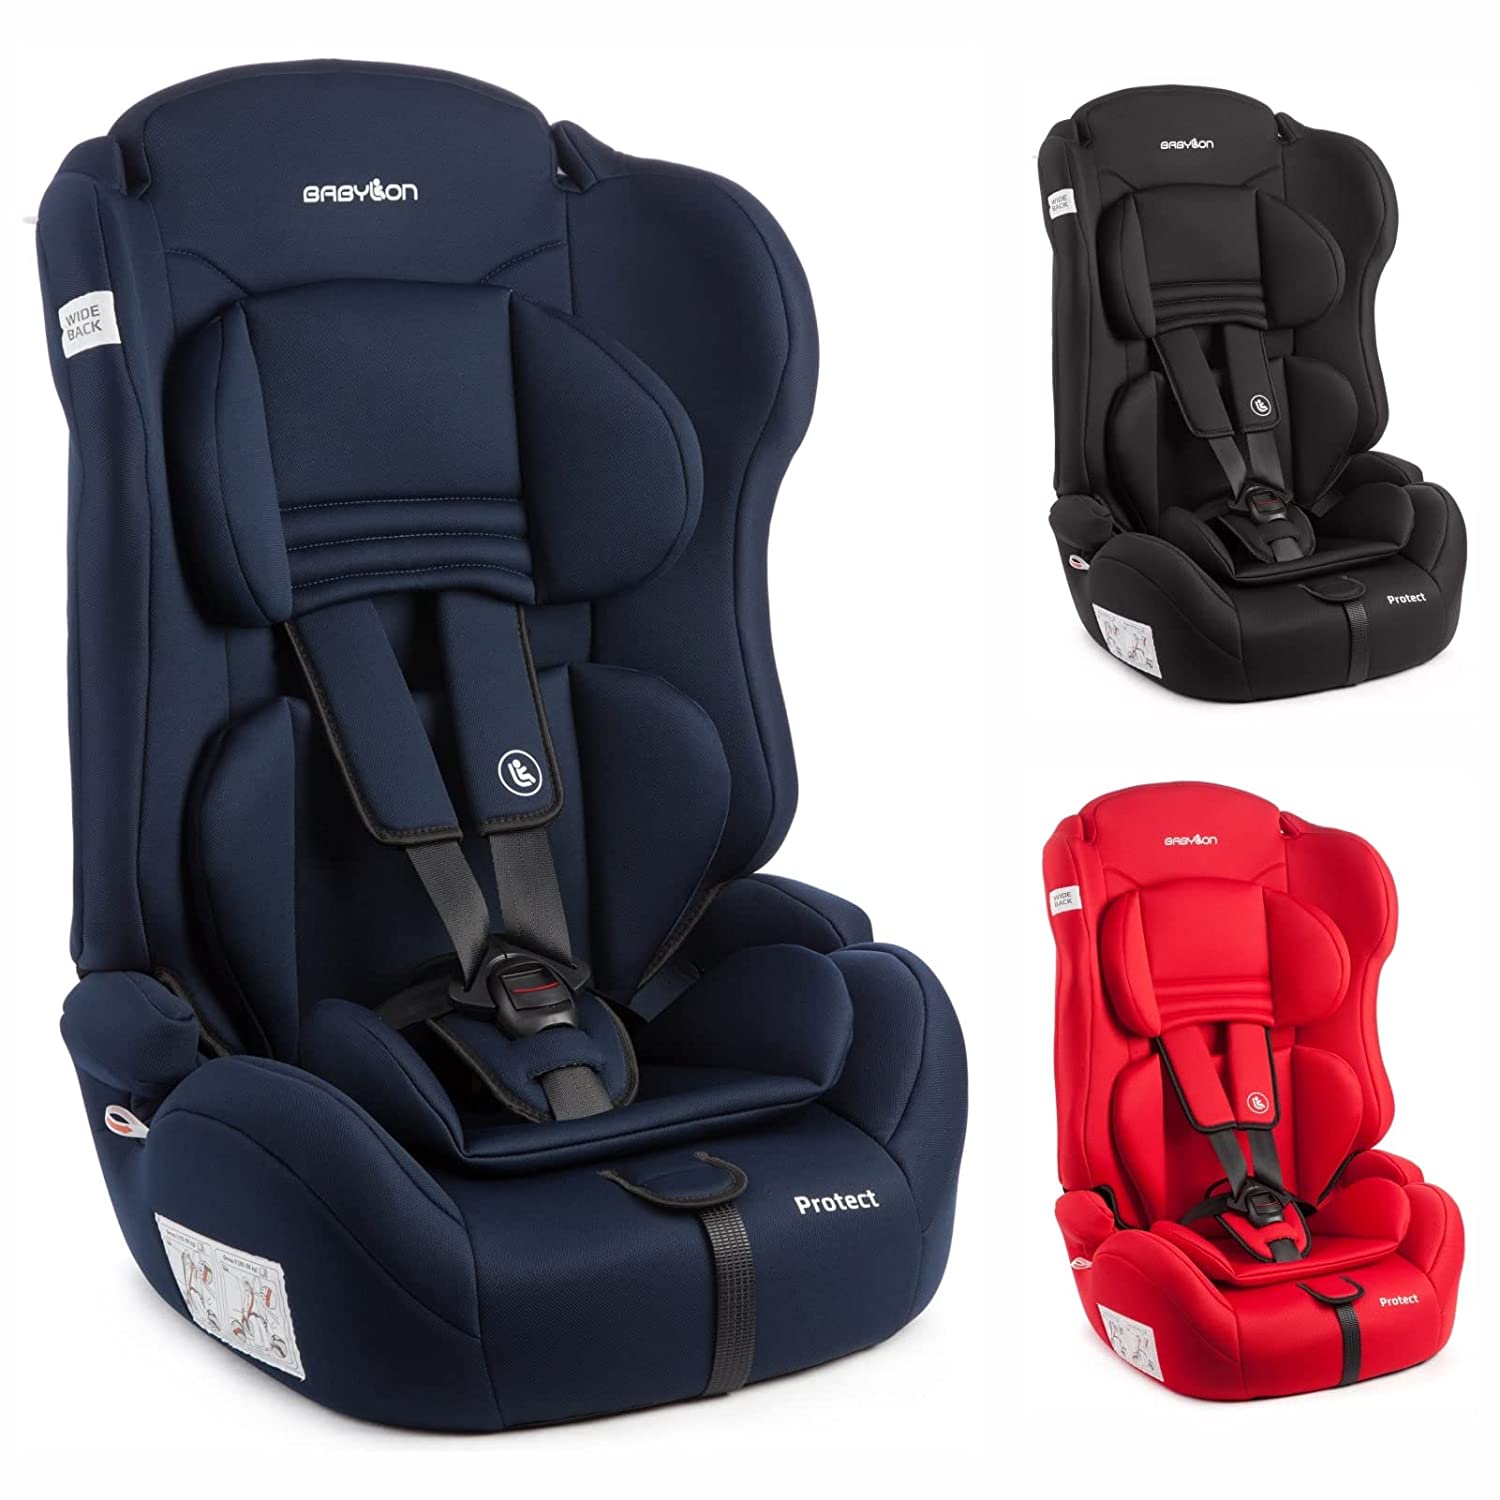 BABYLON Auto Protect Baby Child Car Seat Group 1/2/3, Child Seat 9-36 kg (1 to 12 Years). Child Seat with Top Tether 5-Point Seat Belt. ECE R44/04 Navy Blue